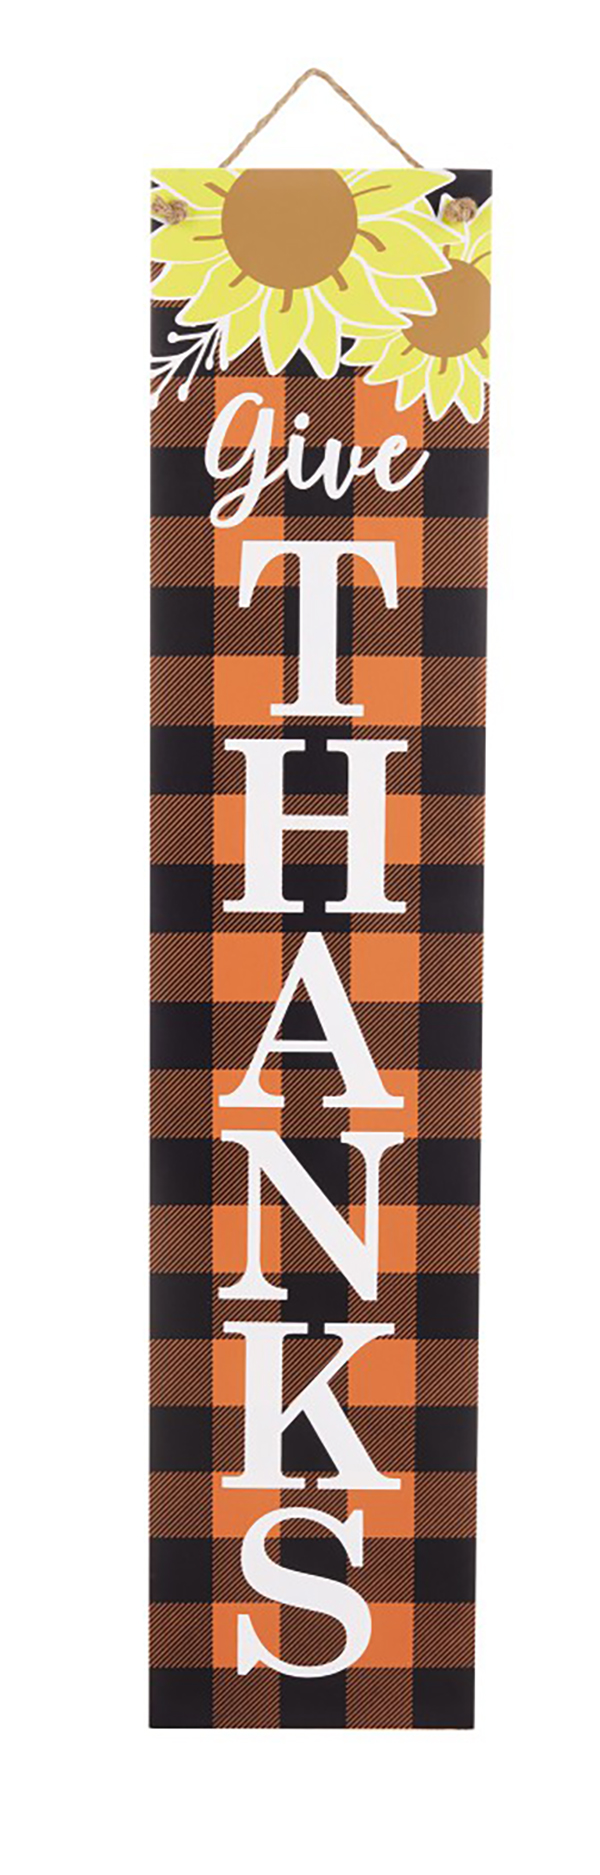 Aldi Fall Reversible Porch Sign give thanks